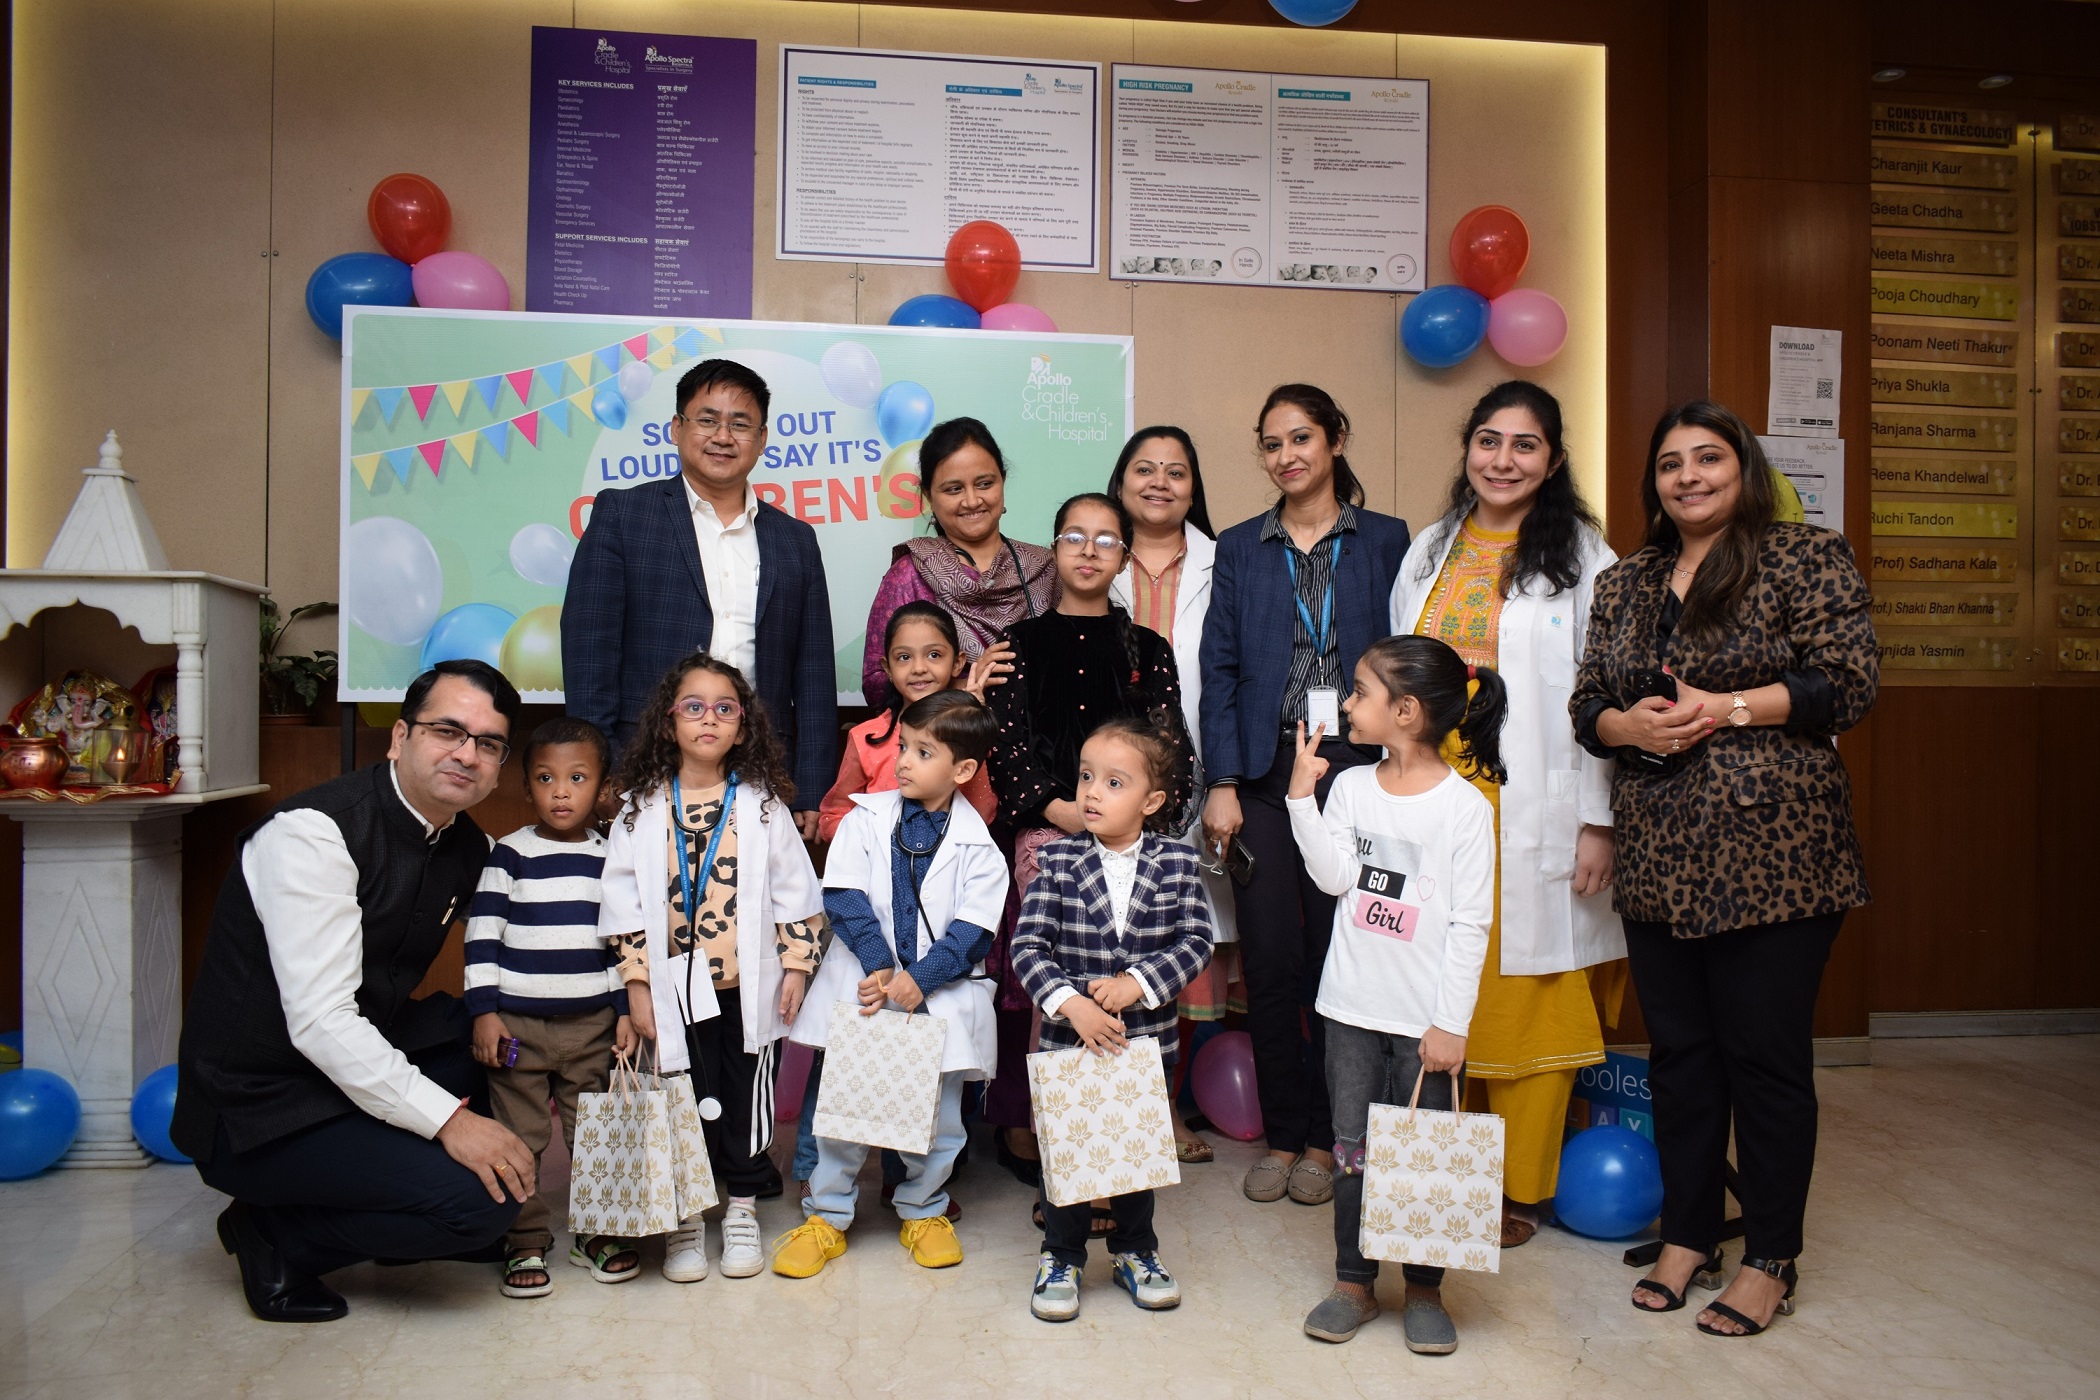 Apollo Cradle & Children’s Hospital Hosts a Fun-Filled Event For Kids